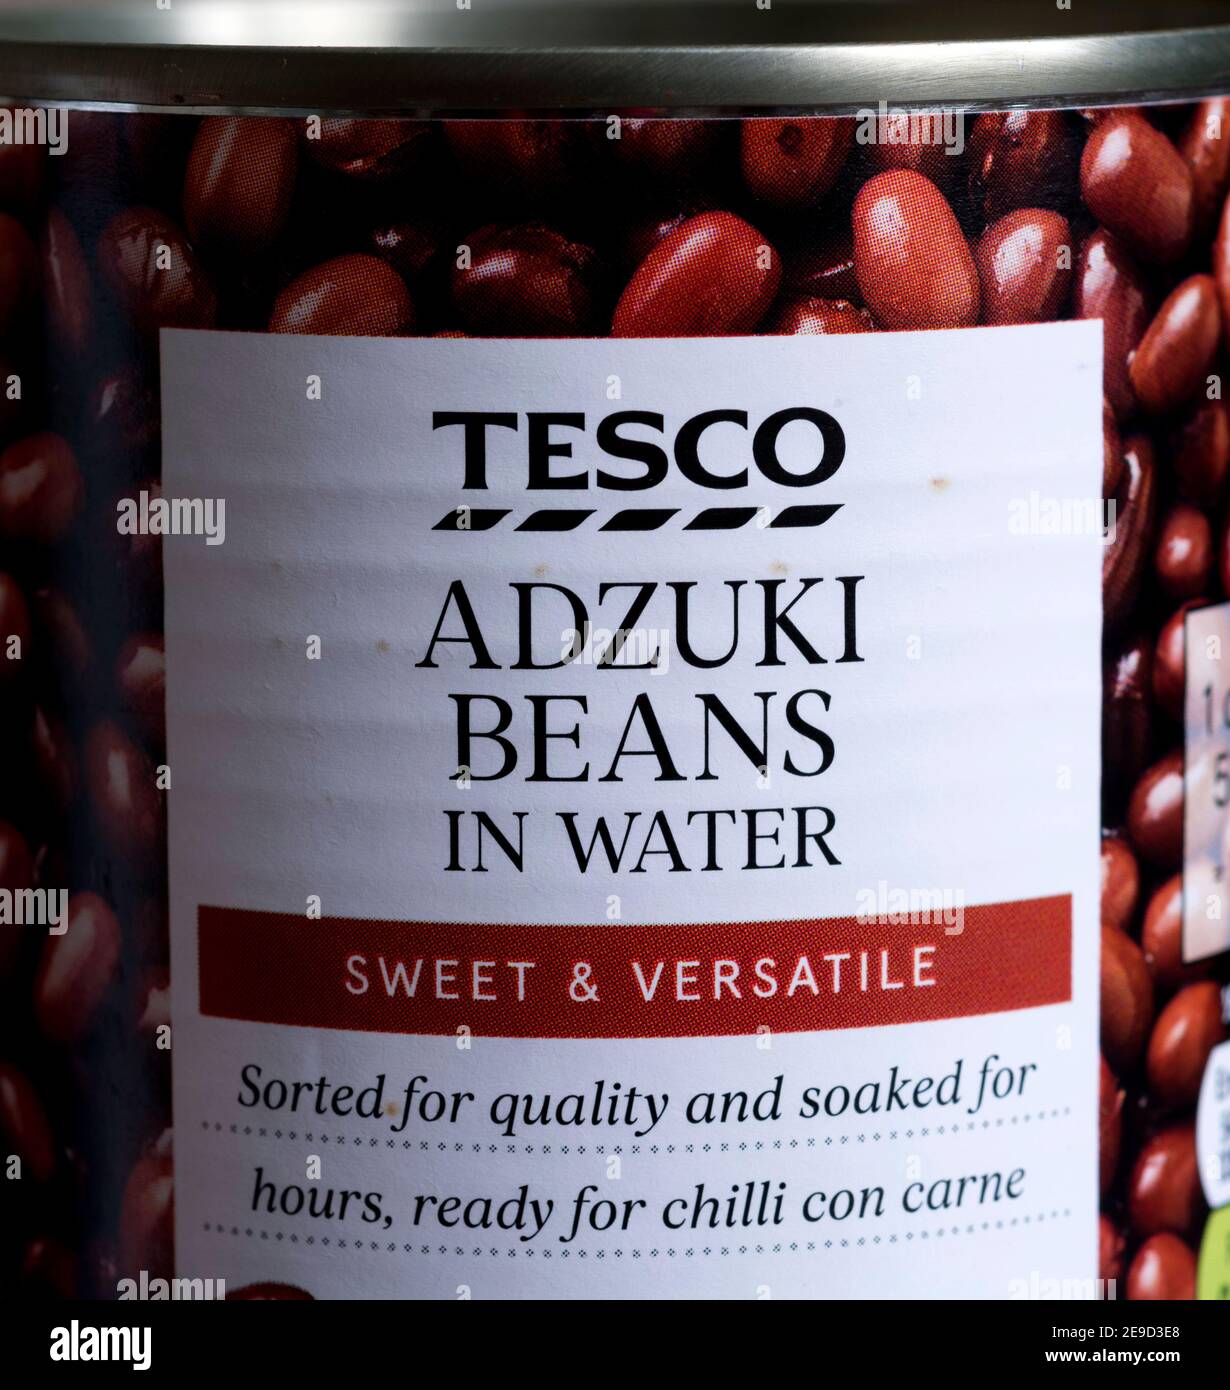 A can of Tesco adzuki beans in water Stock Photo